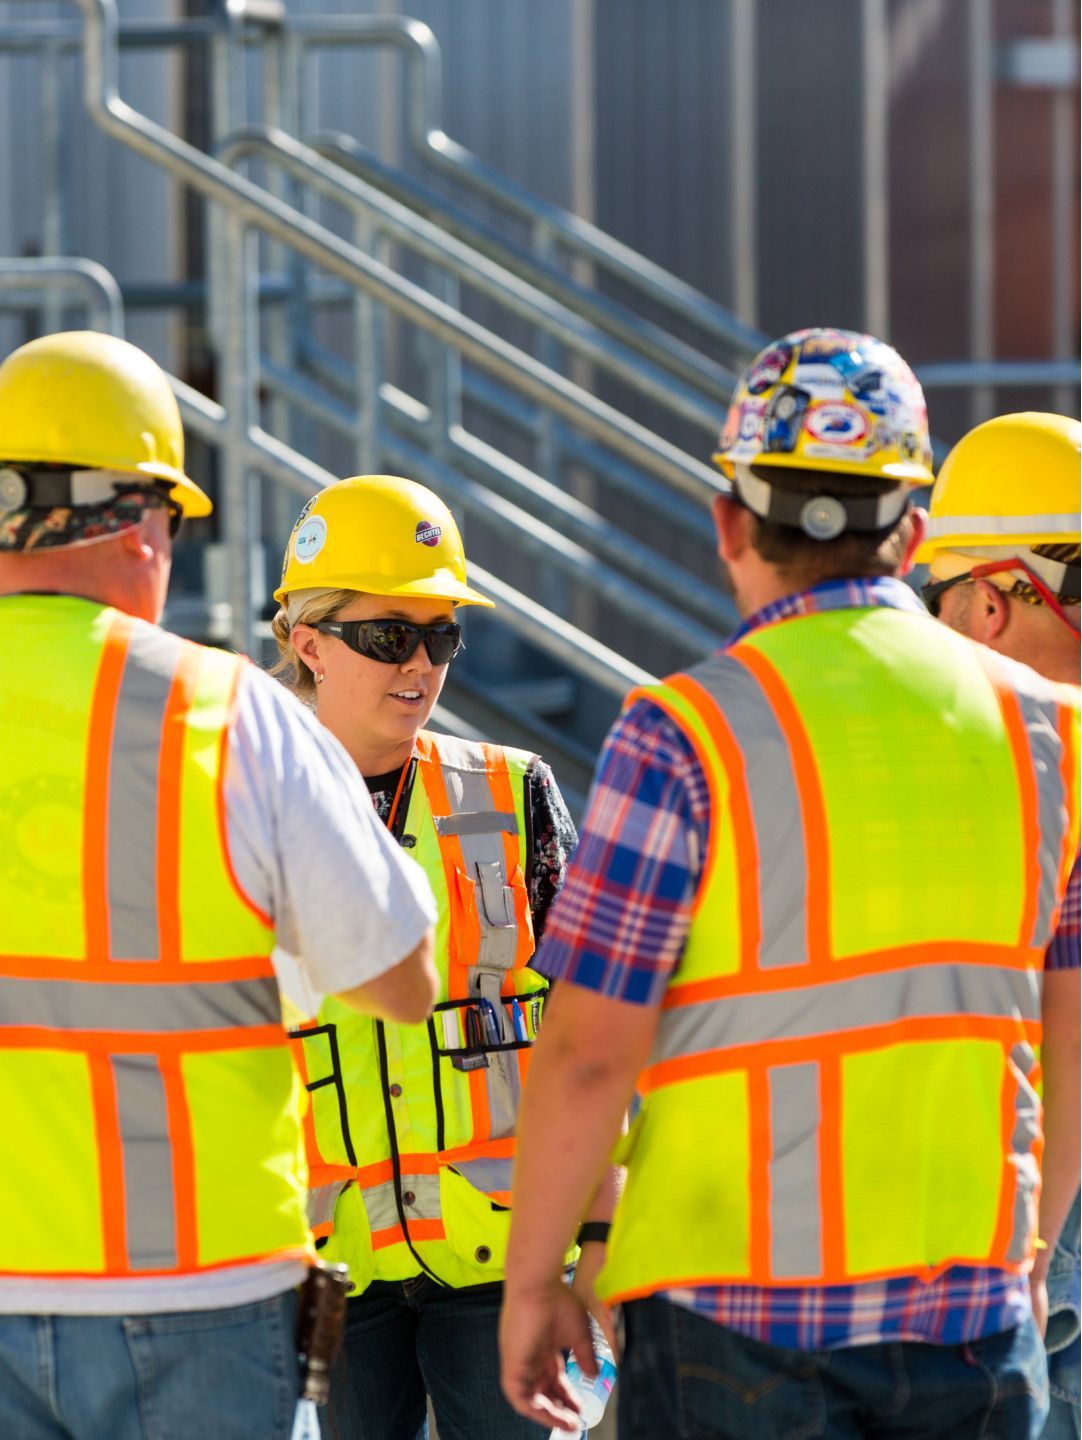 Group of people wearing safety vests and hard hats.